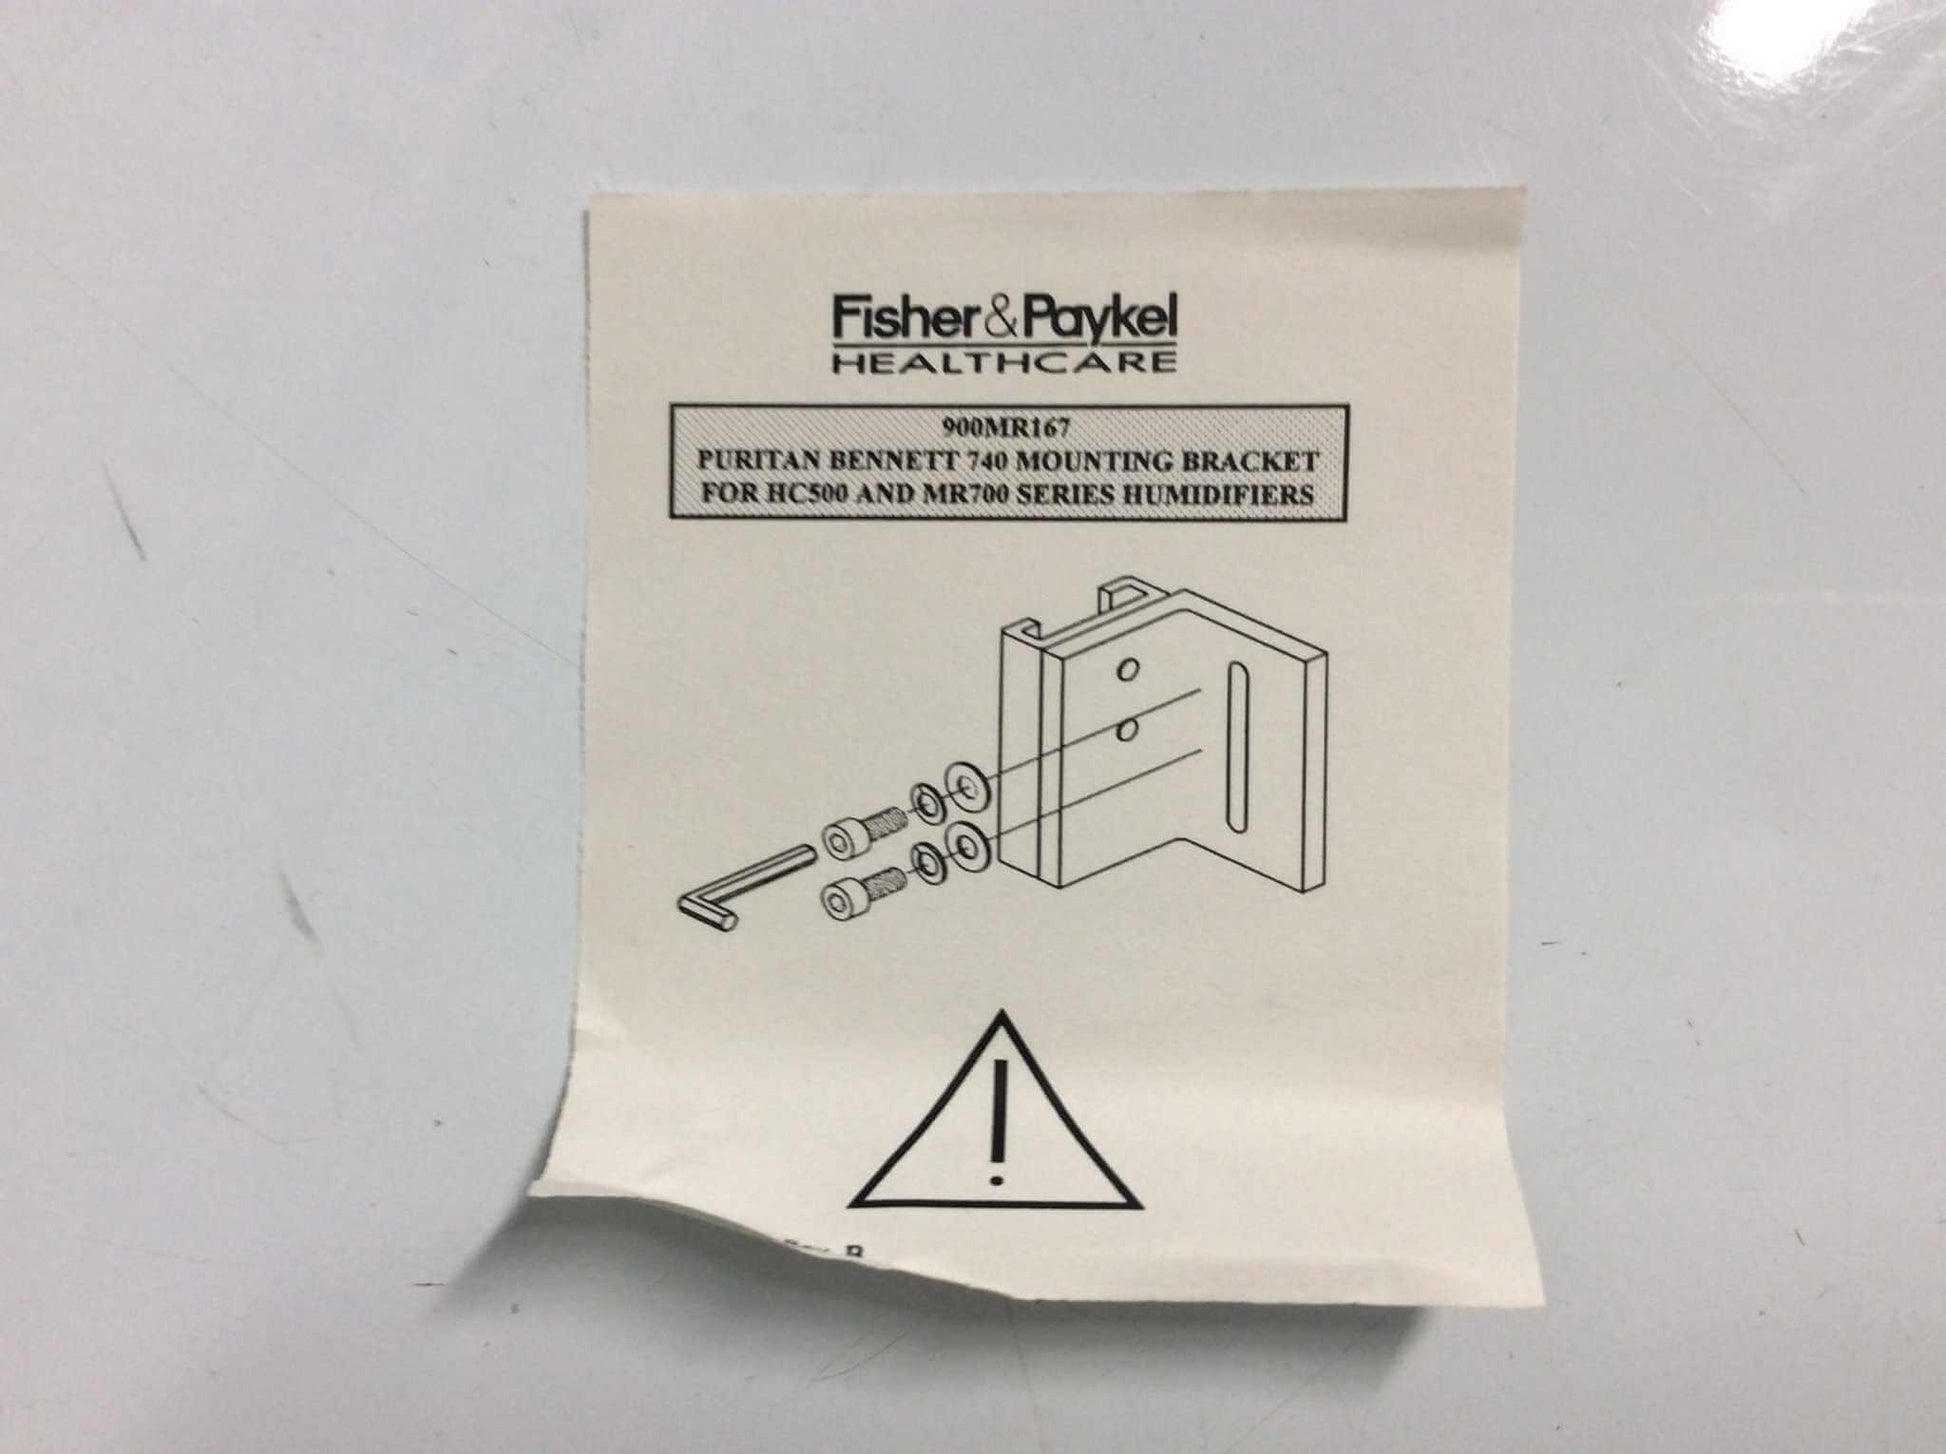 NEW Fisher & Paykel Mounting Bracket 900MR167 Warranty FREE Shipping - MBR Medicals